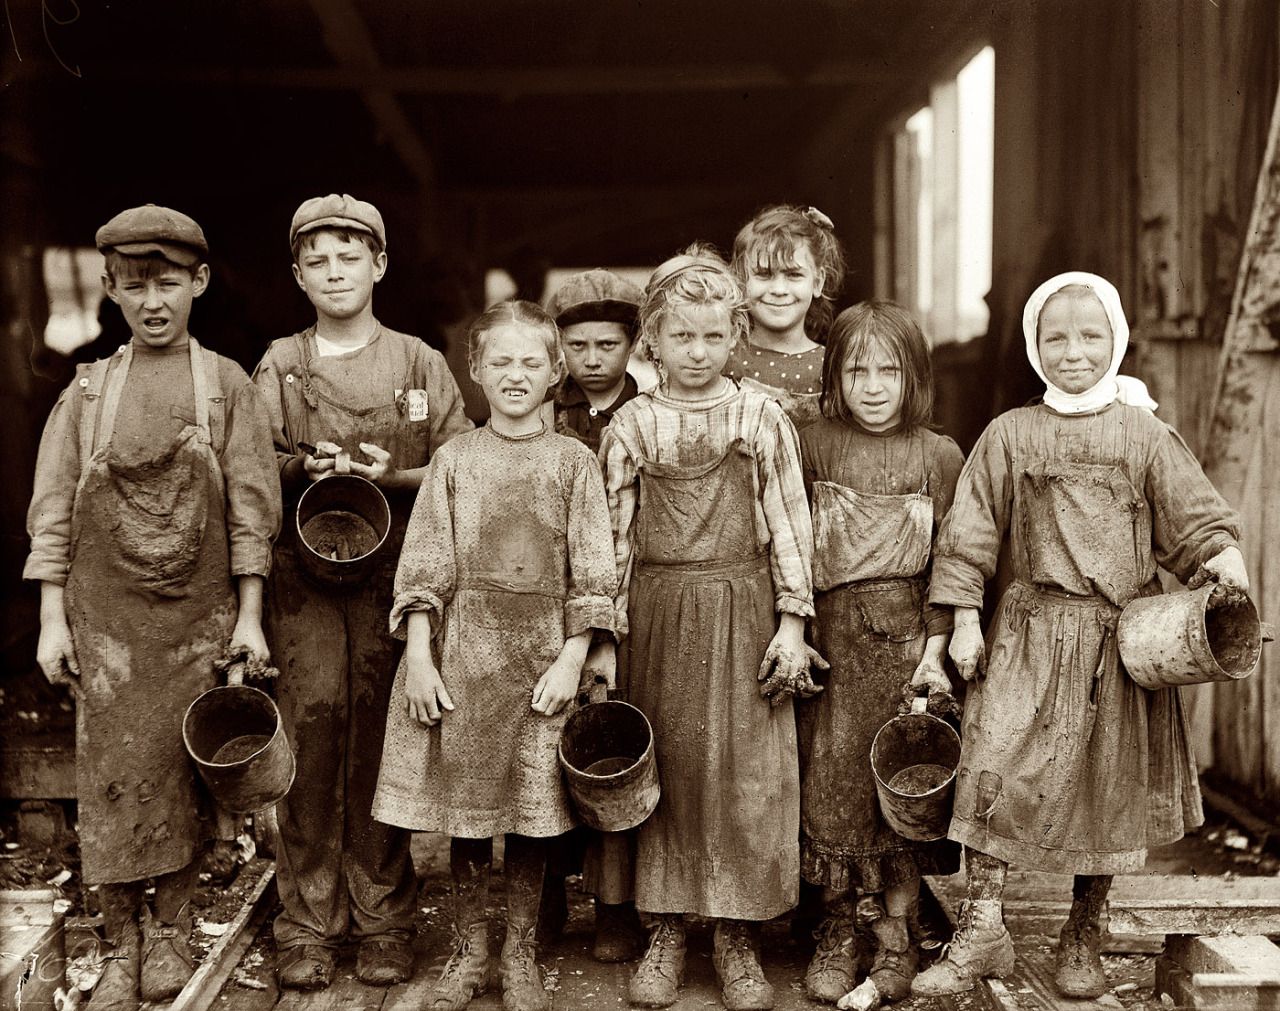 Child Labor, Lil Shuckers, 1912 - by Lewis Hine (1874 - 1940), USA ...